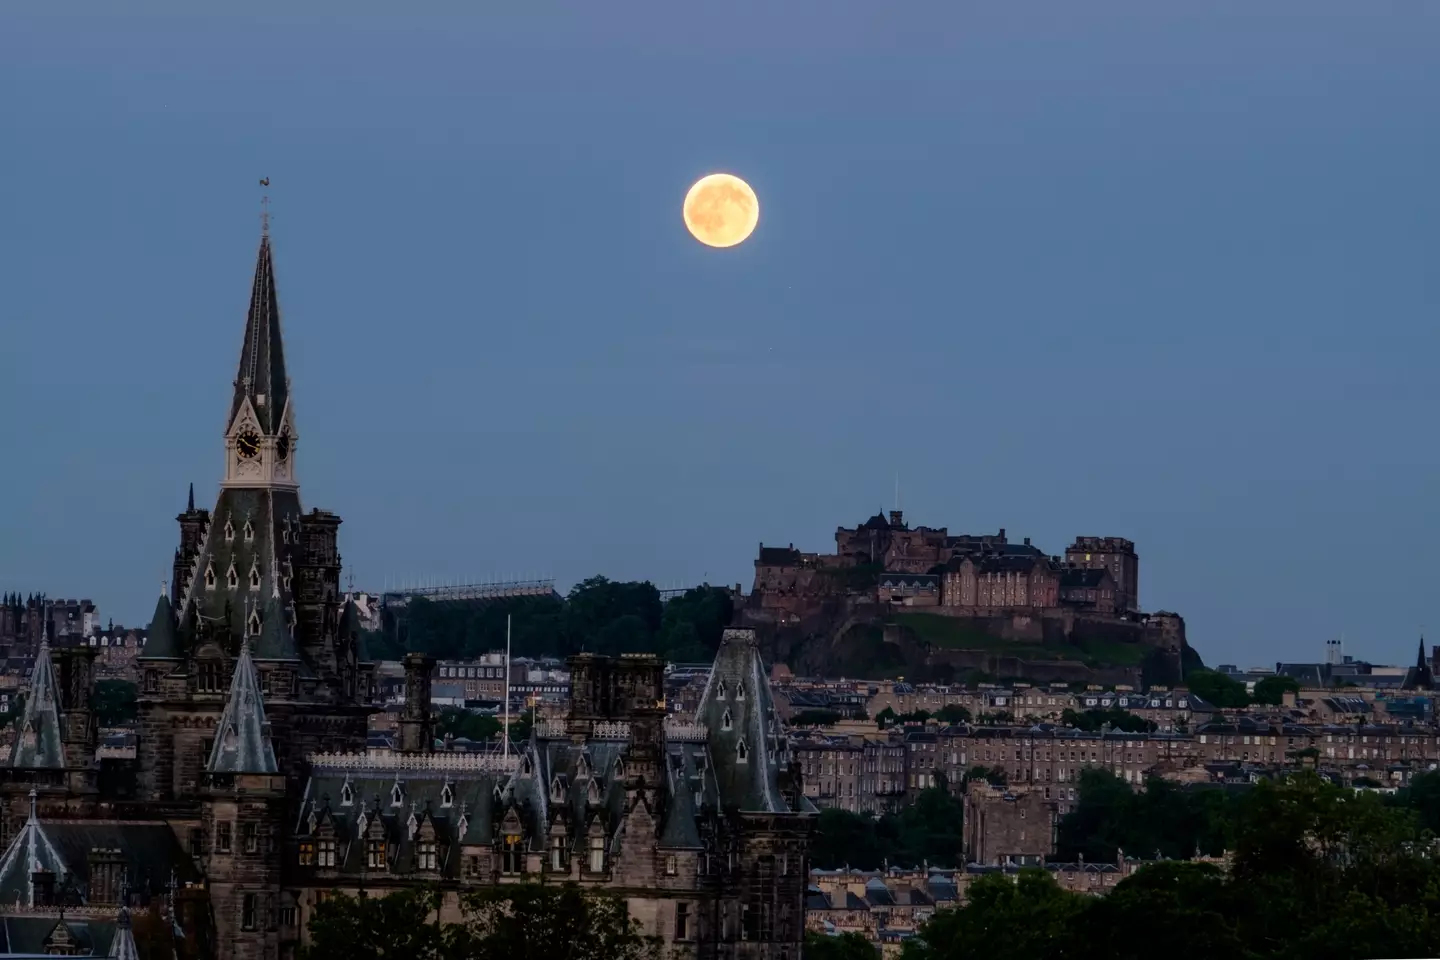 This weekend's moon will be clearest from Edinburgh. (rosn123/Getty)